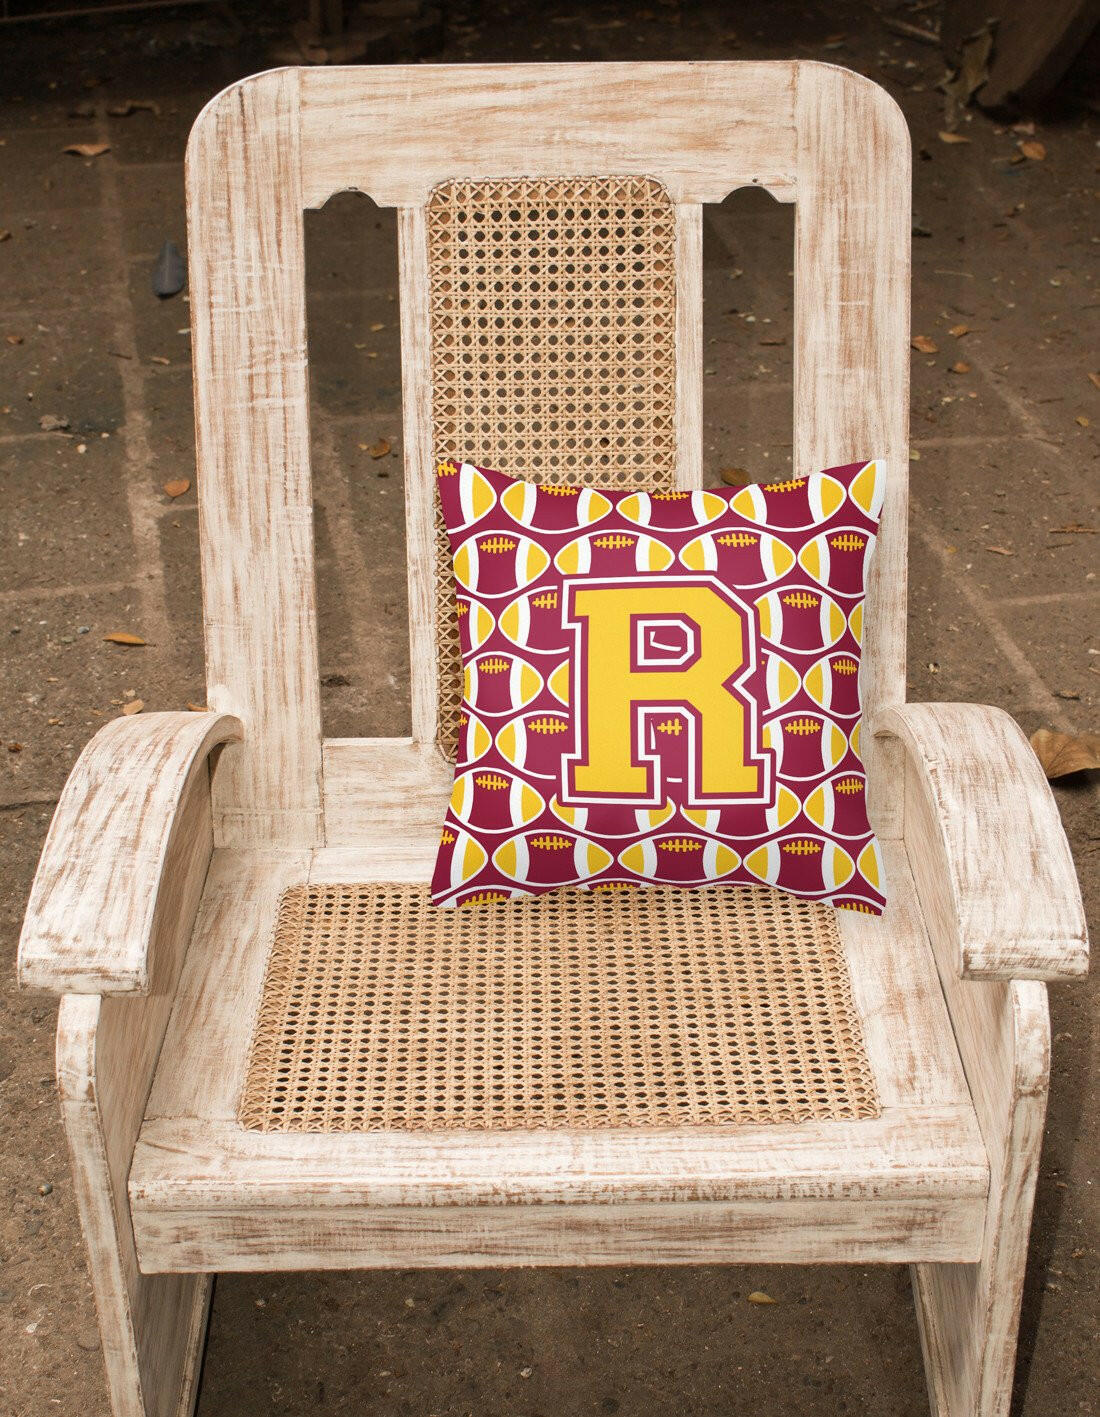 Letter R Football Maroon and Gold Fabric Decorative Pillow CJ1081-RPW1414 by Caroline's Treasures